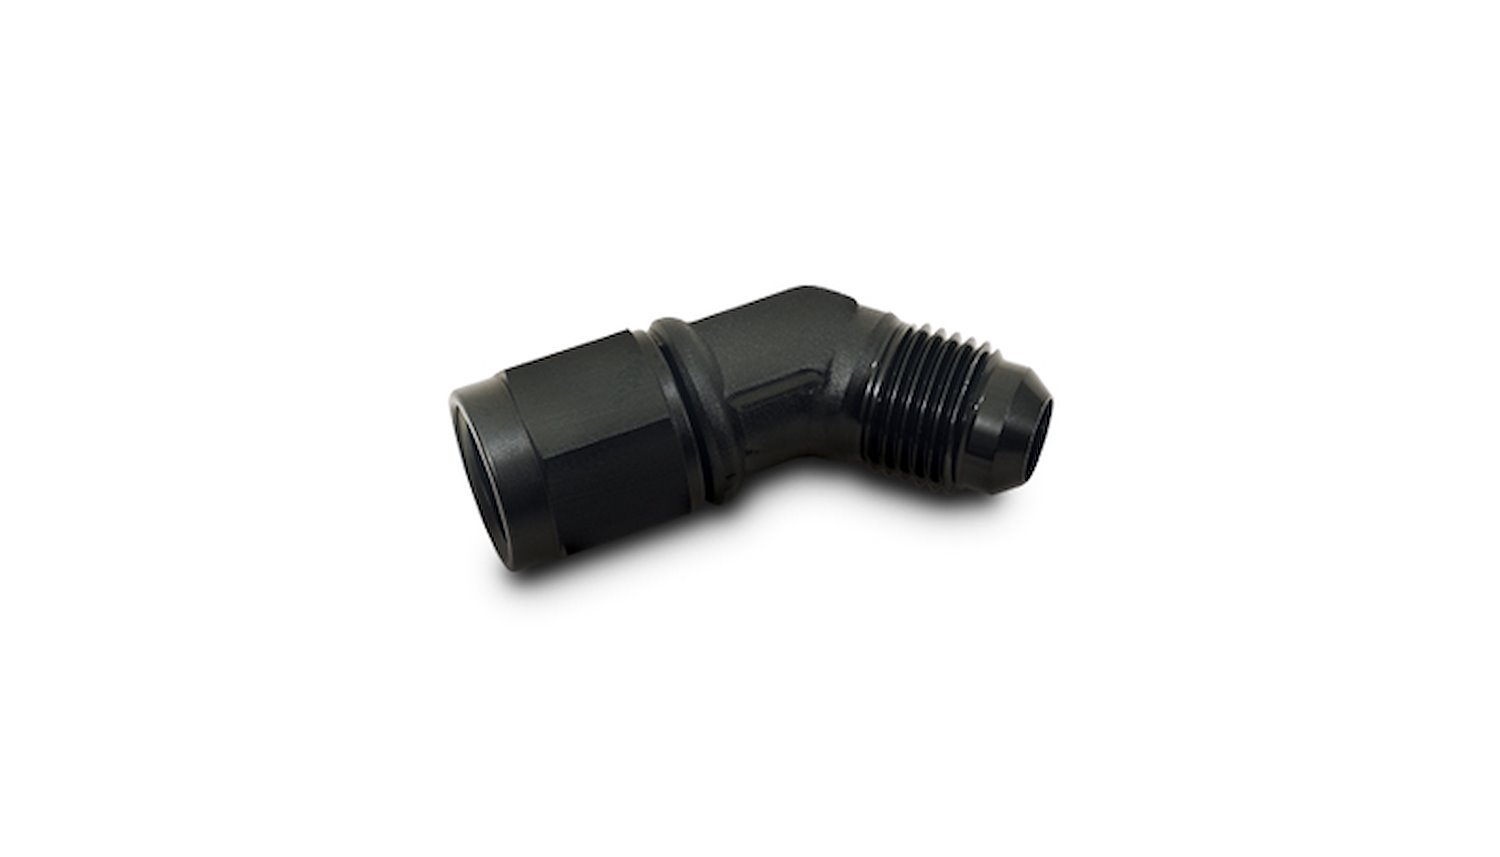 Female to Male Swivel Adapter -16AN X -16AN